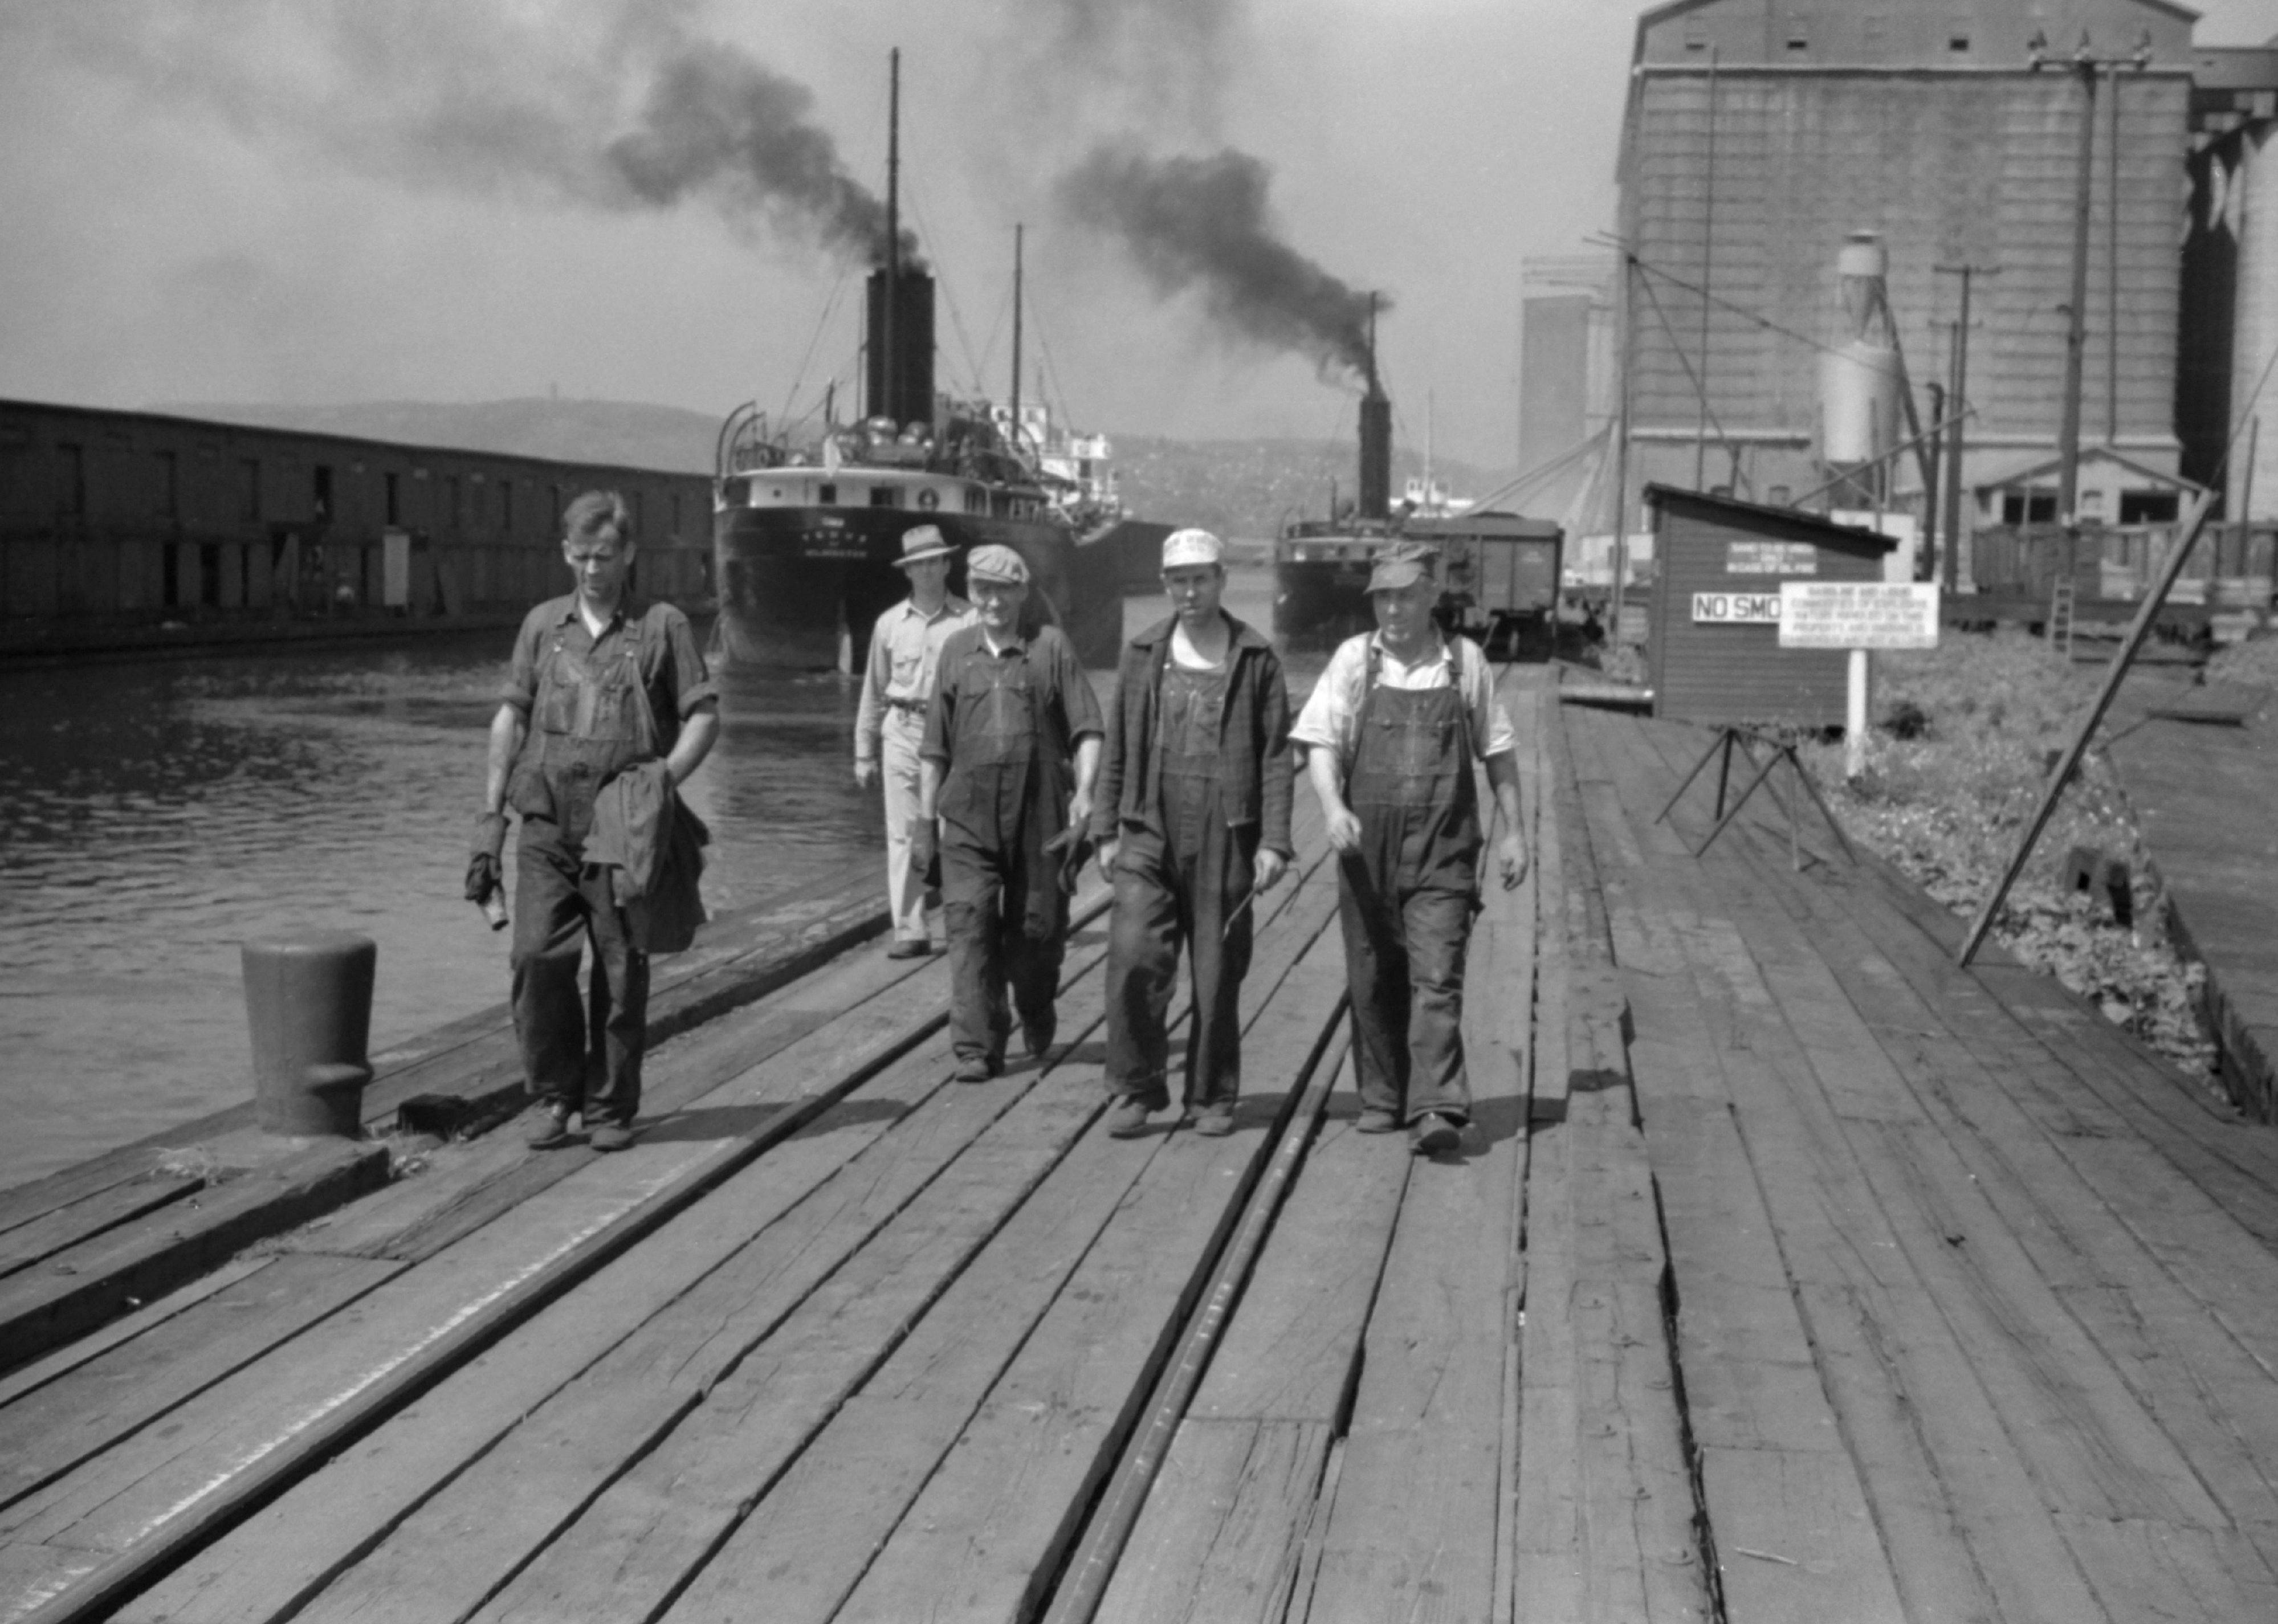 Workers walk along a dock in Superior, Wisconsin